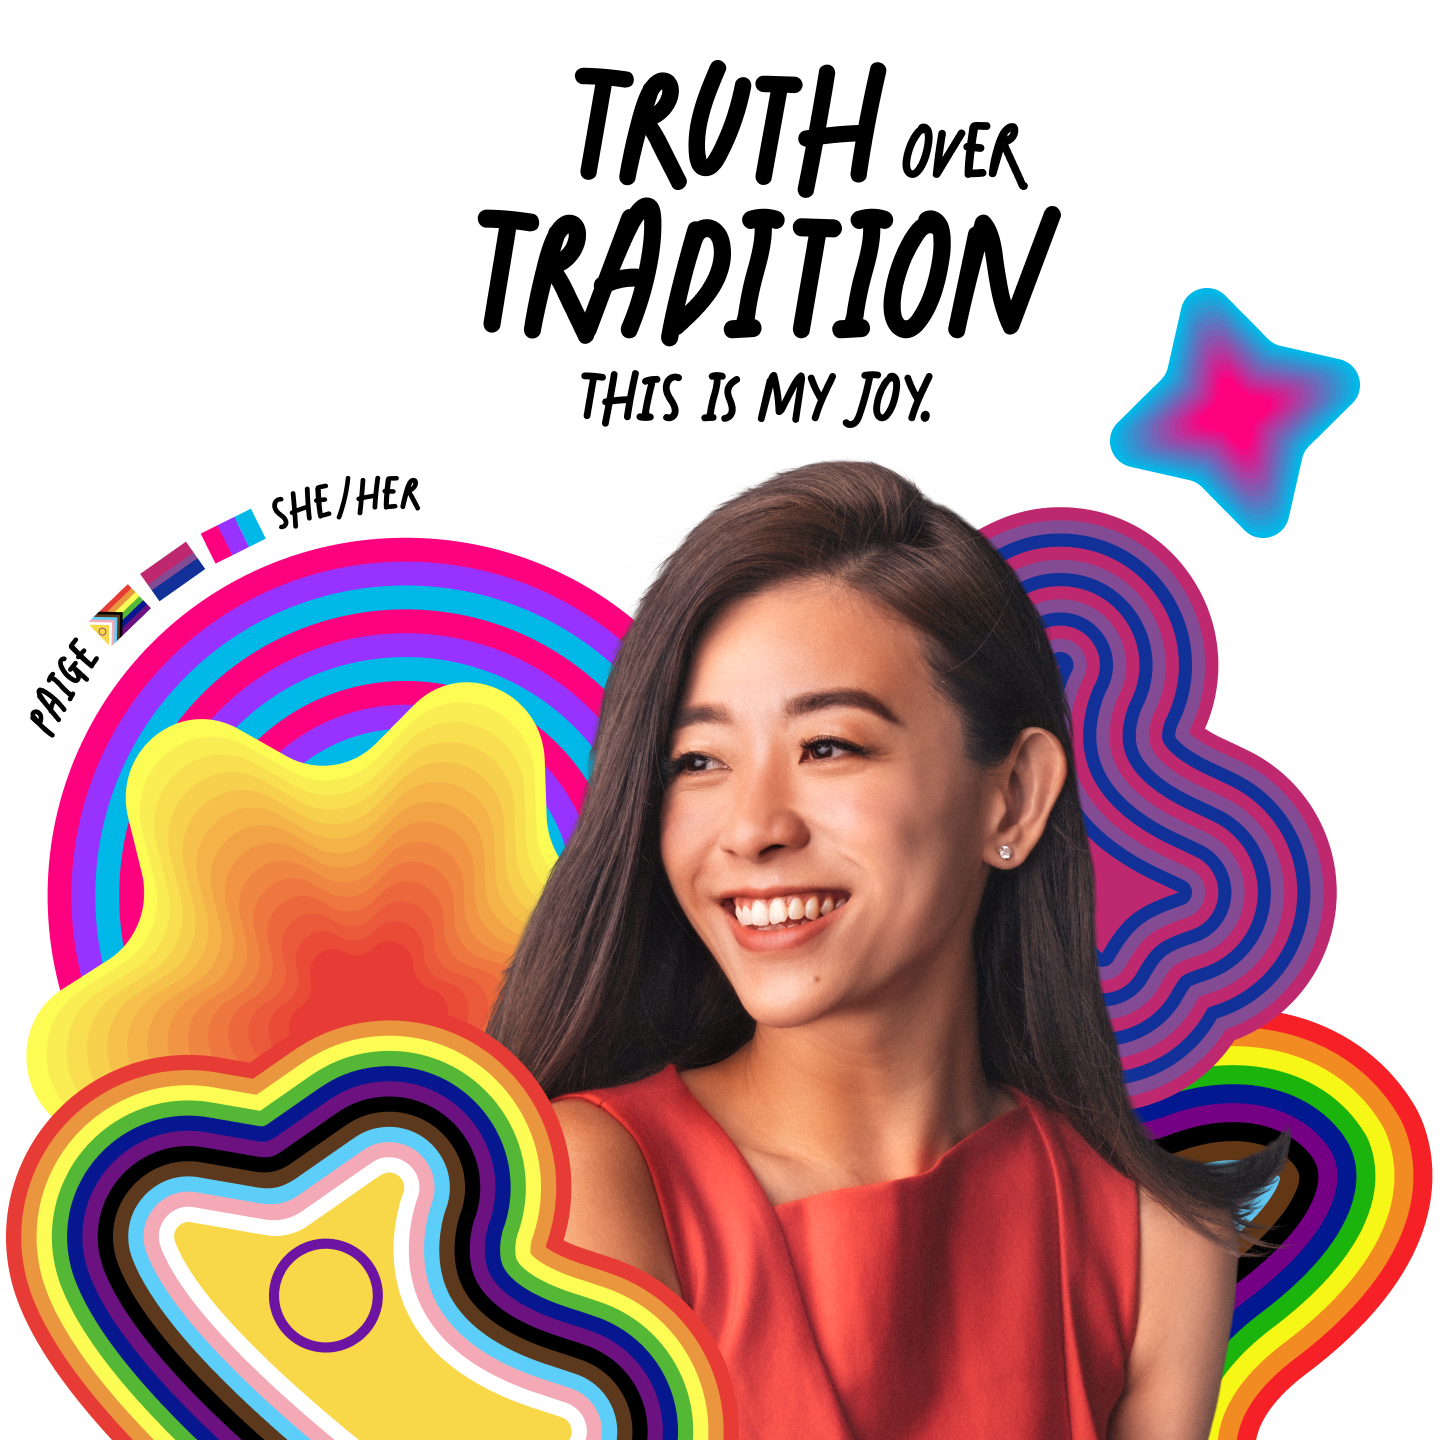 A person smiling, labeled "Paige, she/her," with text "Truth over Tradition, This is my Joy" against a colorful background of stars and abstract shapes.